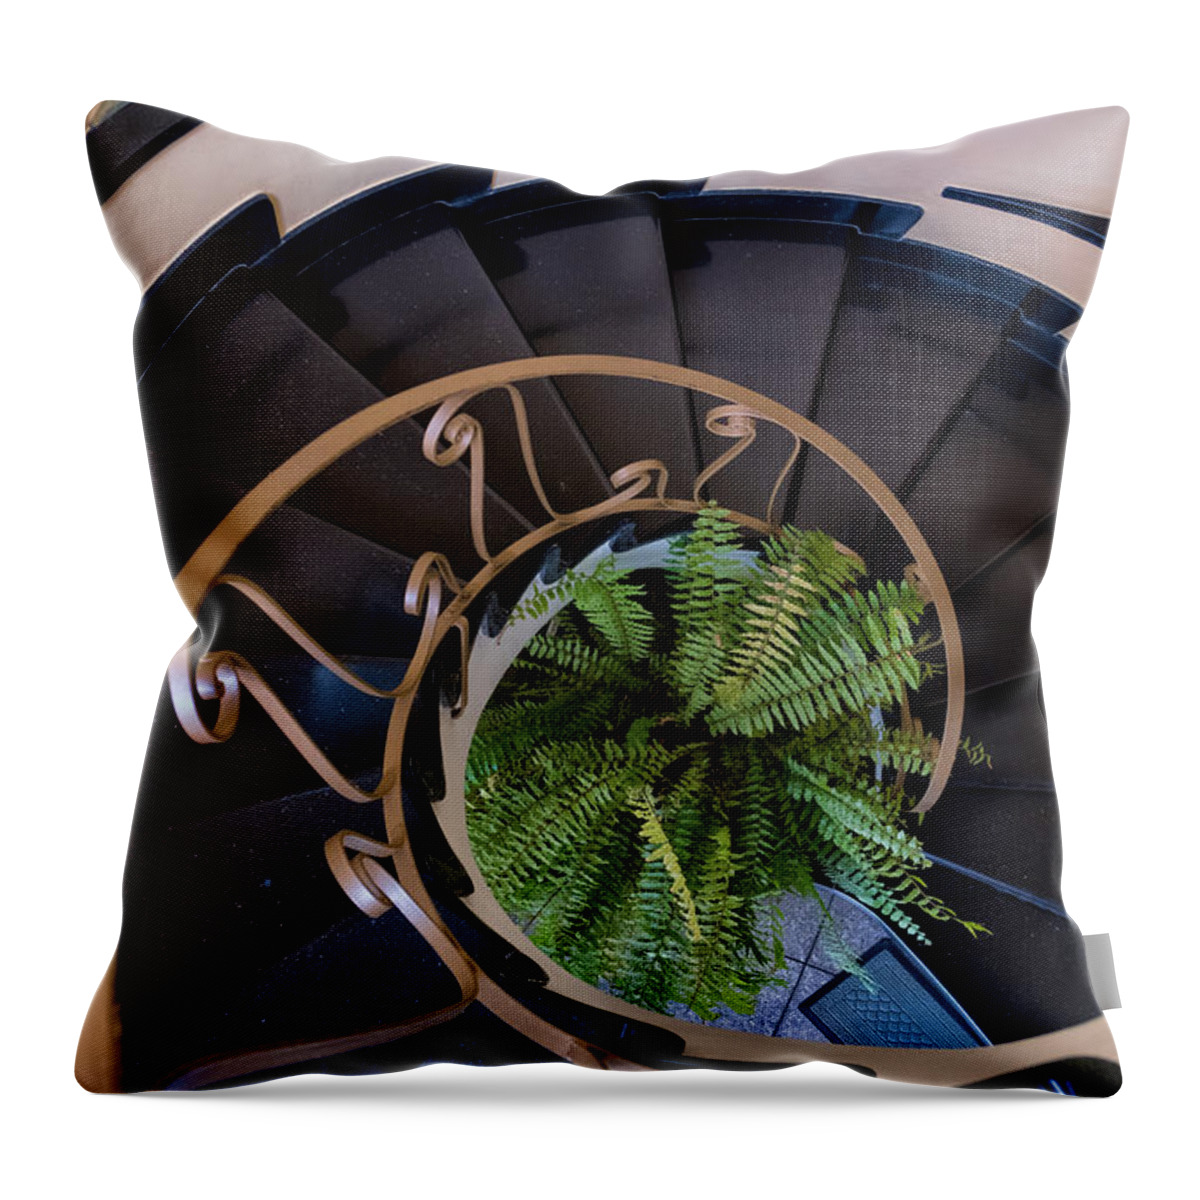 Old Throw Pillow featuring the photograph Spiral Staircase by Roberta Kayne